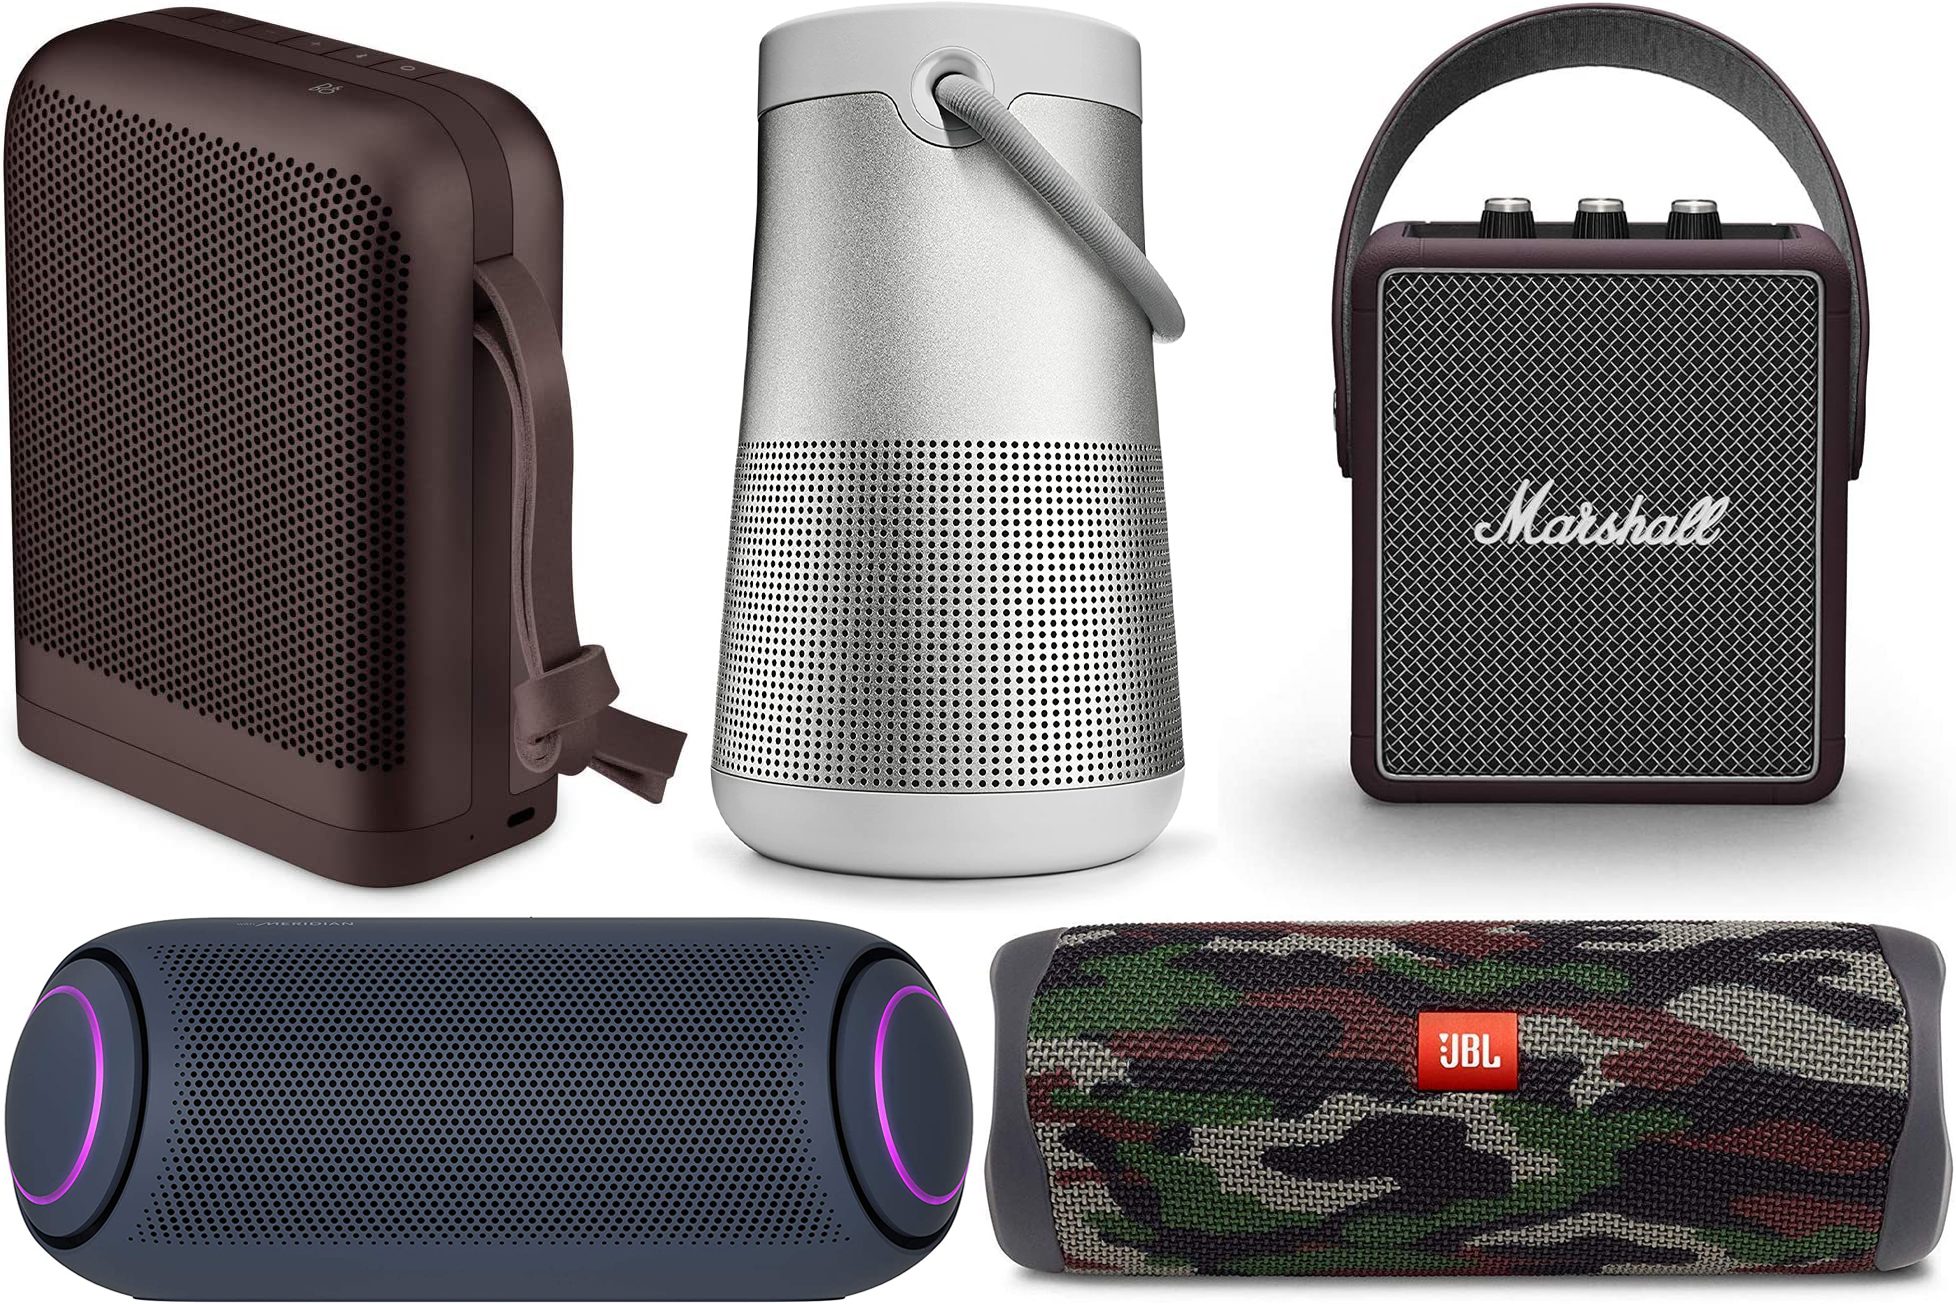 Top 5 small portable bluetooth speakers